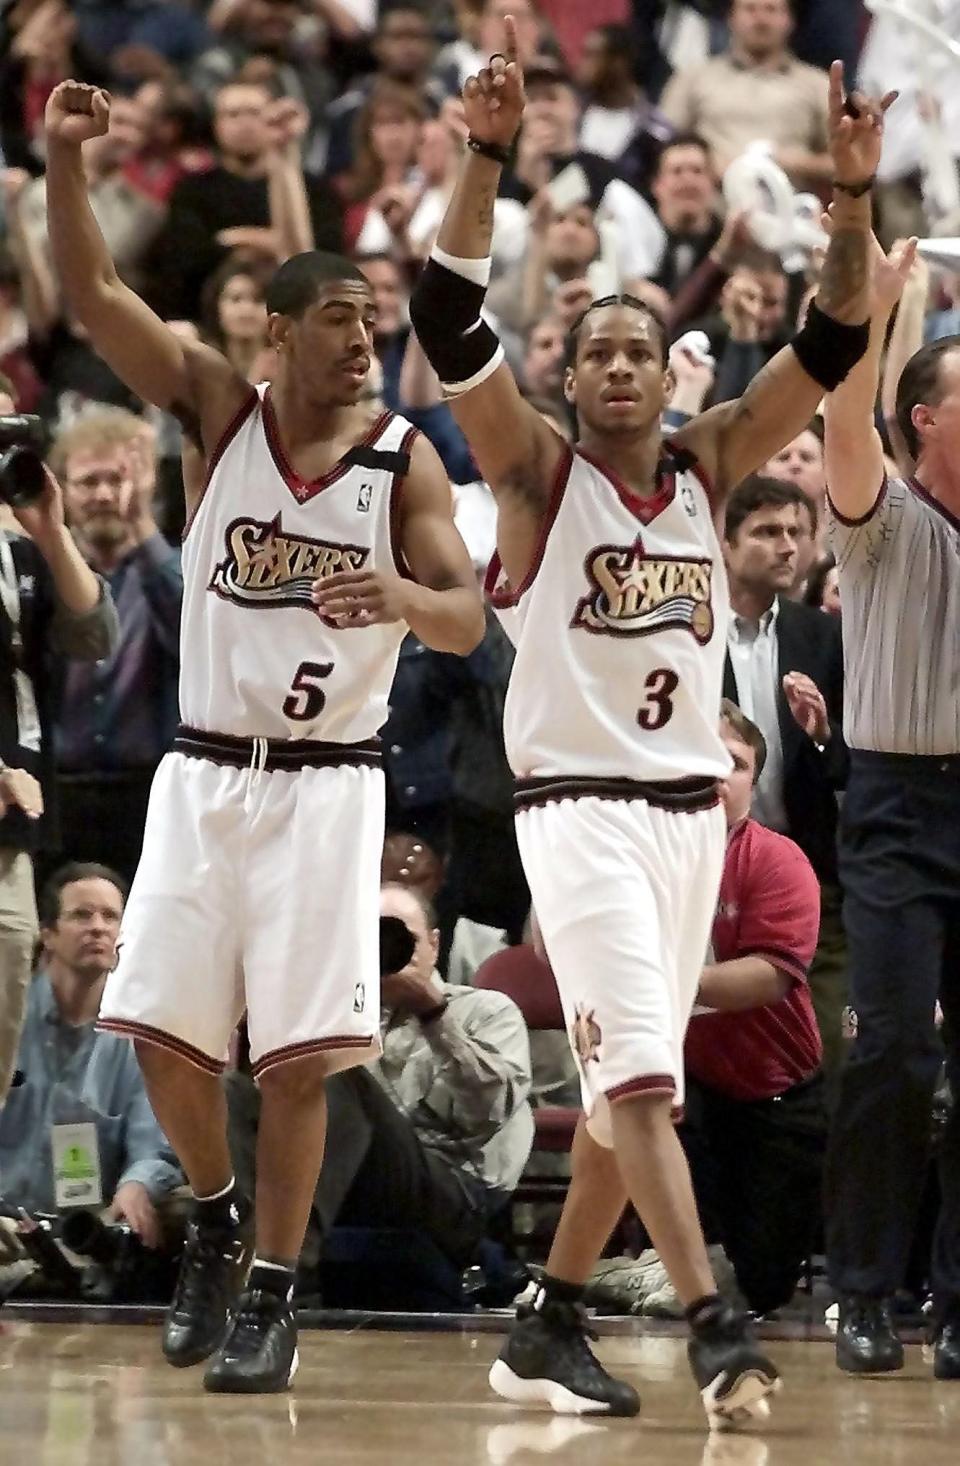 Philadelphia 76ers guards Kevin Ollie, left, and Allen Iverson celebrate the 81-76 victory over the Charlotte Hornets, as the final buzzer sounds in Game 3 of the NBA playoffs first-round series against the Charlotte Hornets, April 28, 2000 at First Union Center in Philadelphia.